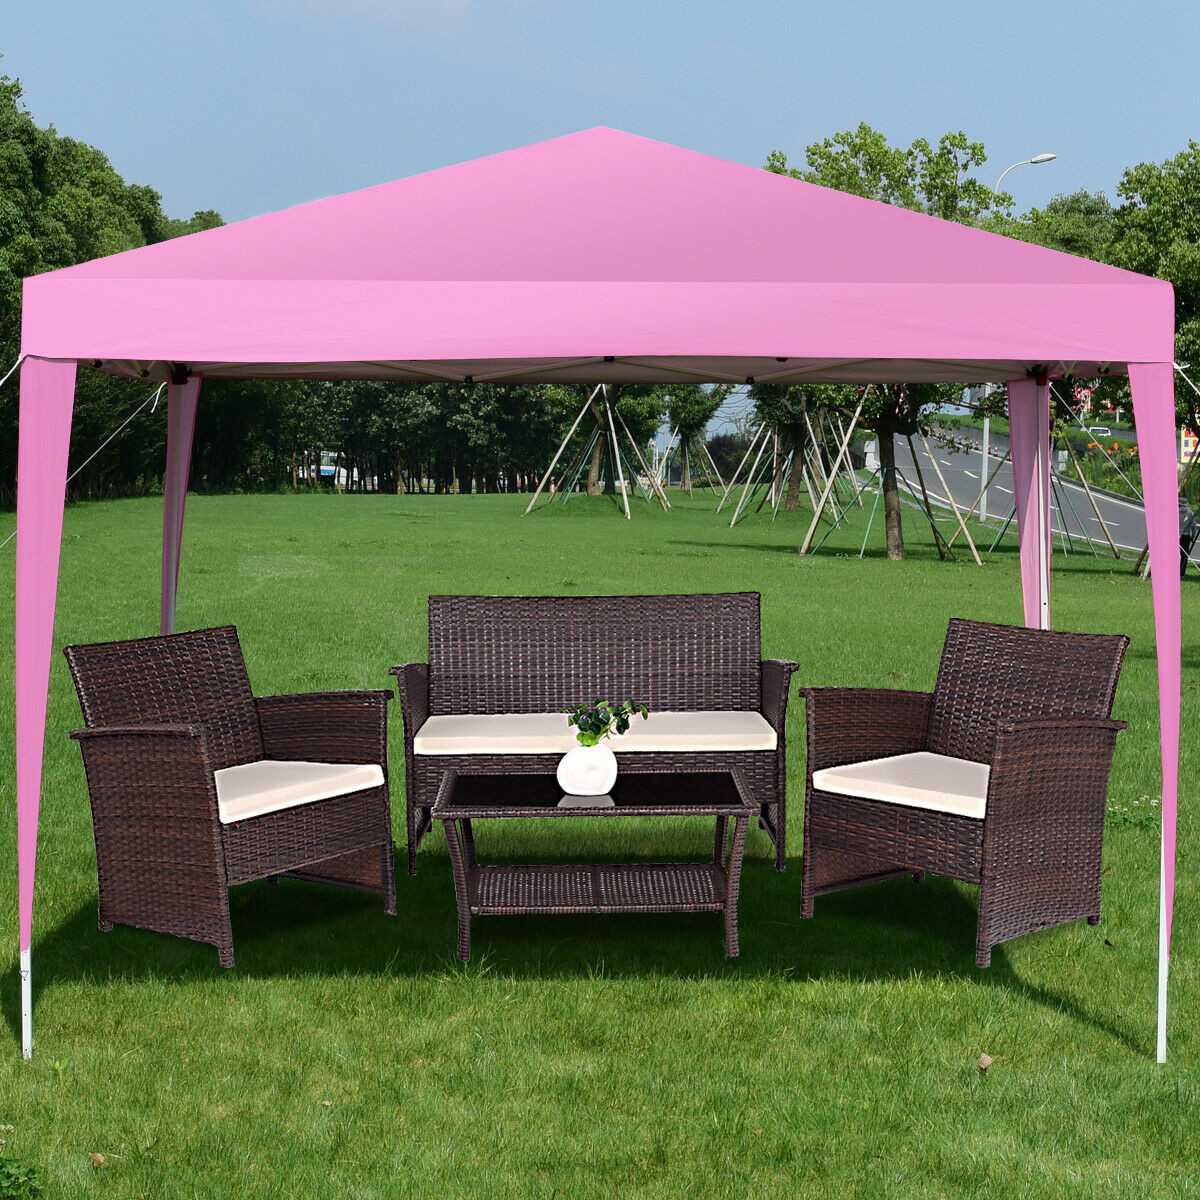 Outdoor Foldable Portable Shelter Gazebo Canopy Tent